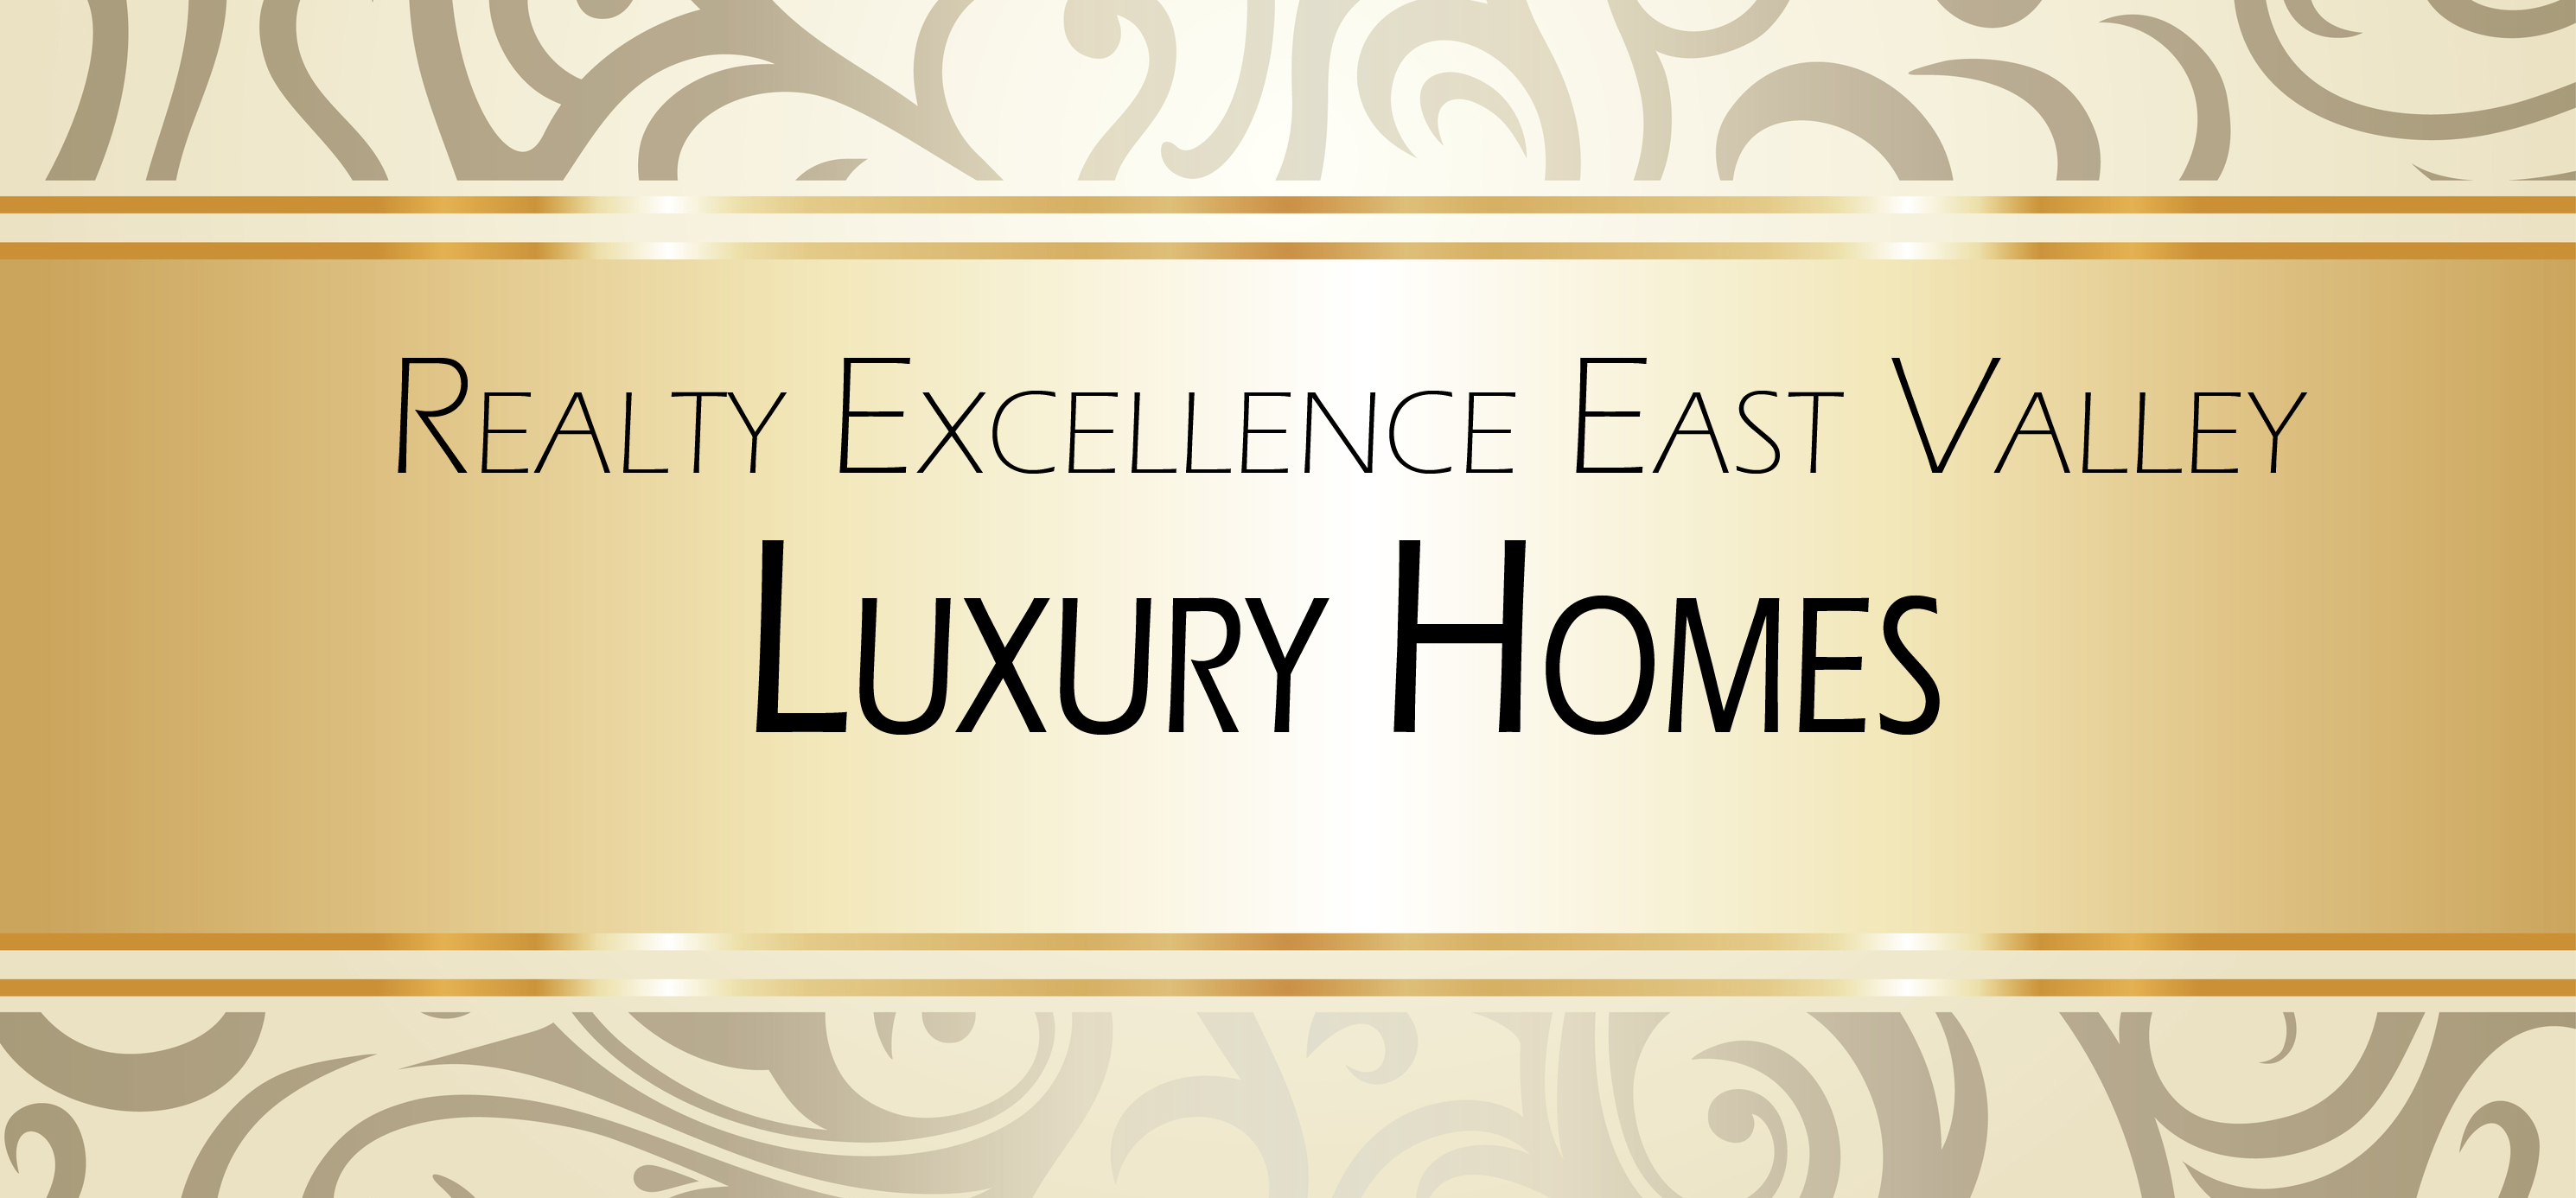 Luxury Homes in Arizona - Bill Salvatore, Realty Excellence East Valley - 602-999-0952